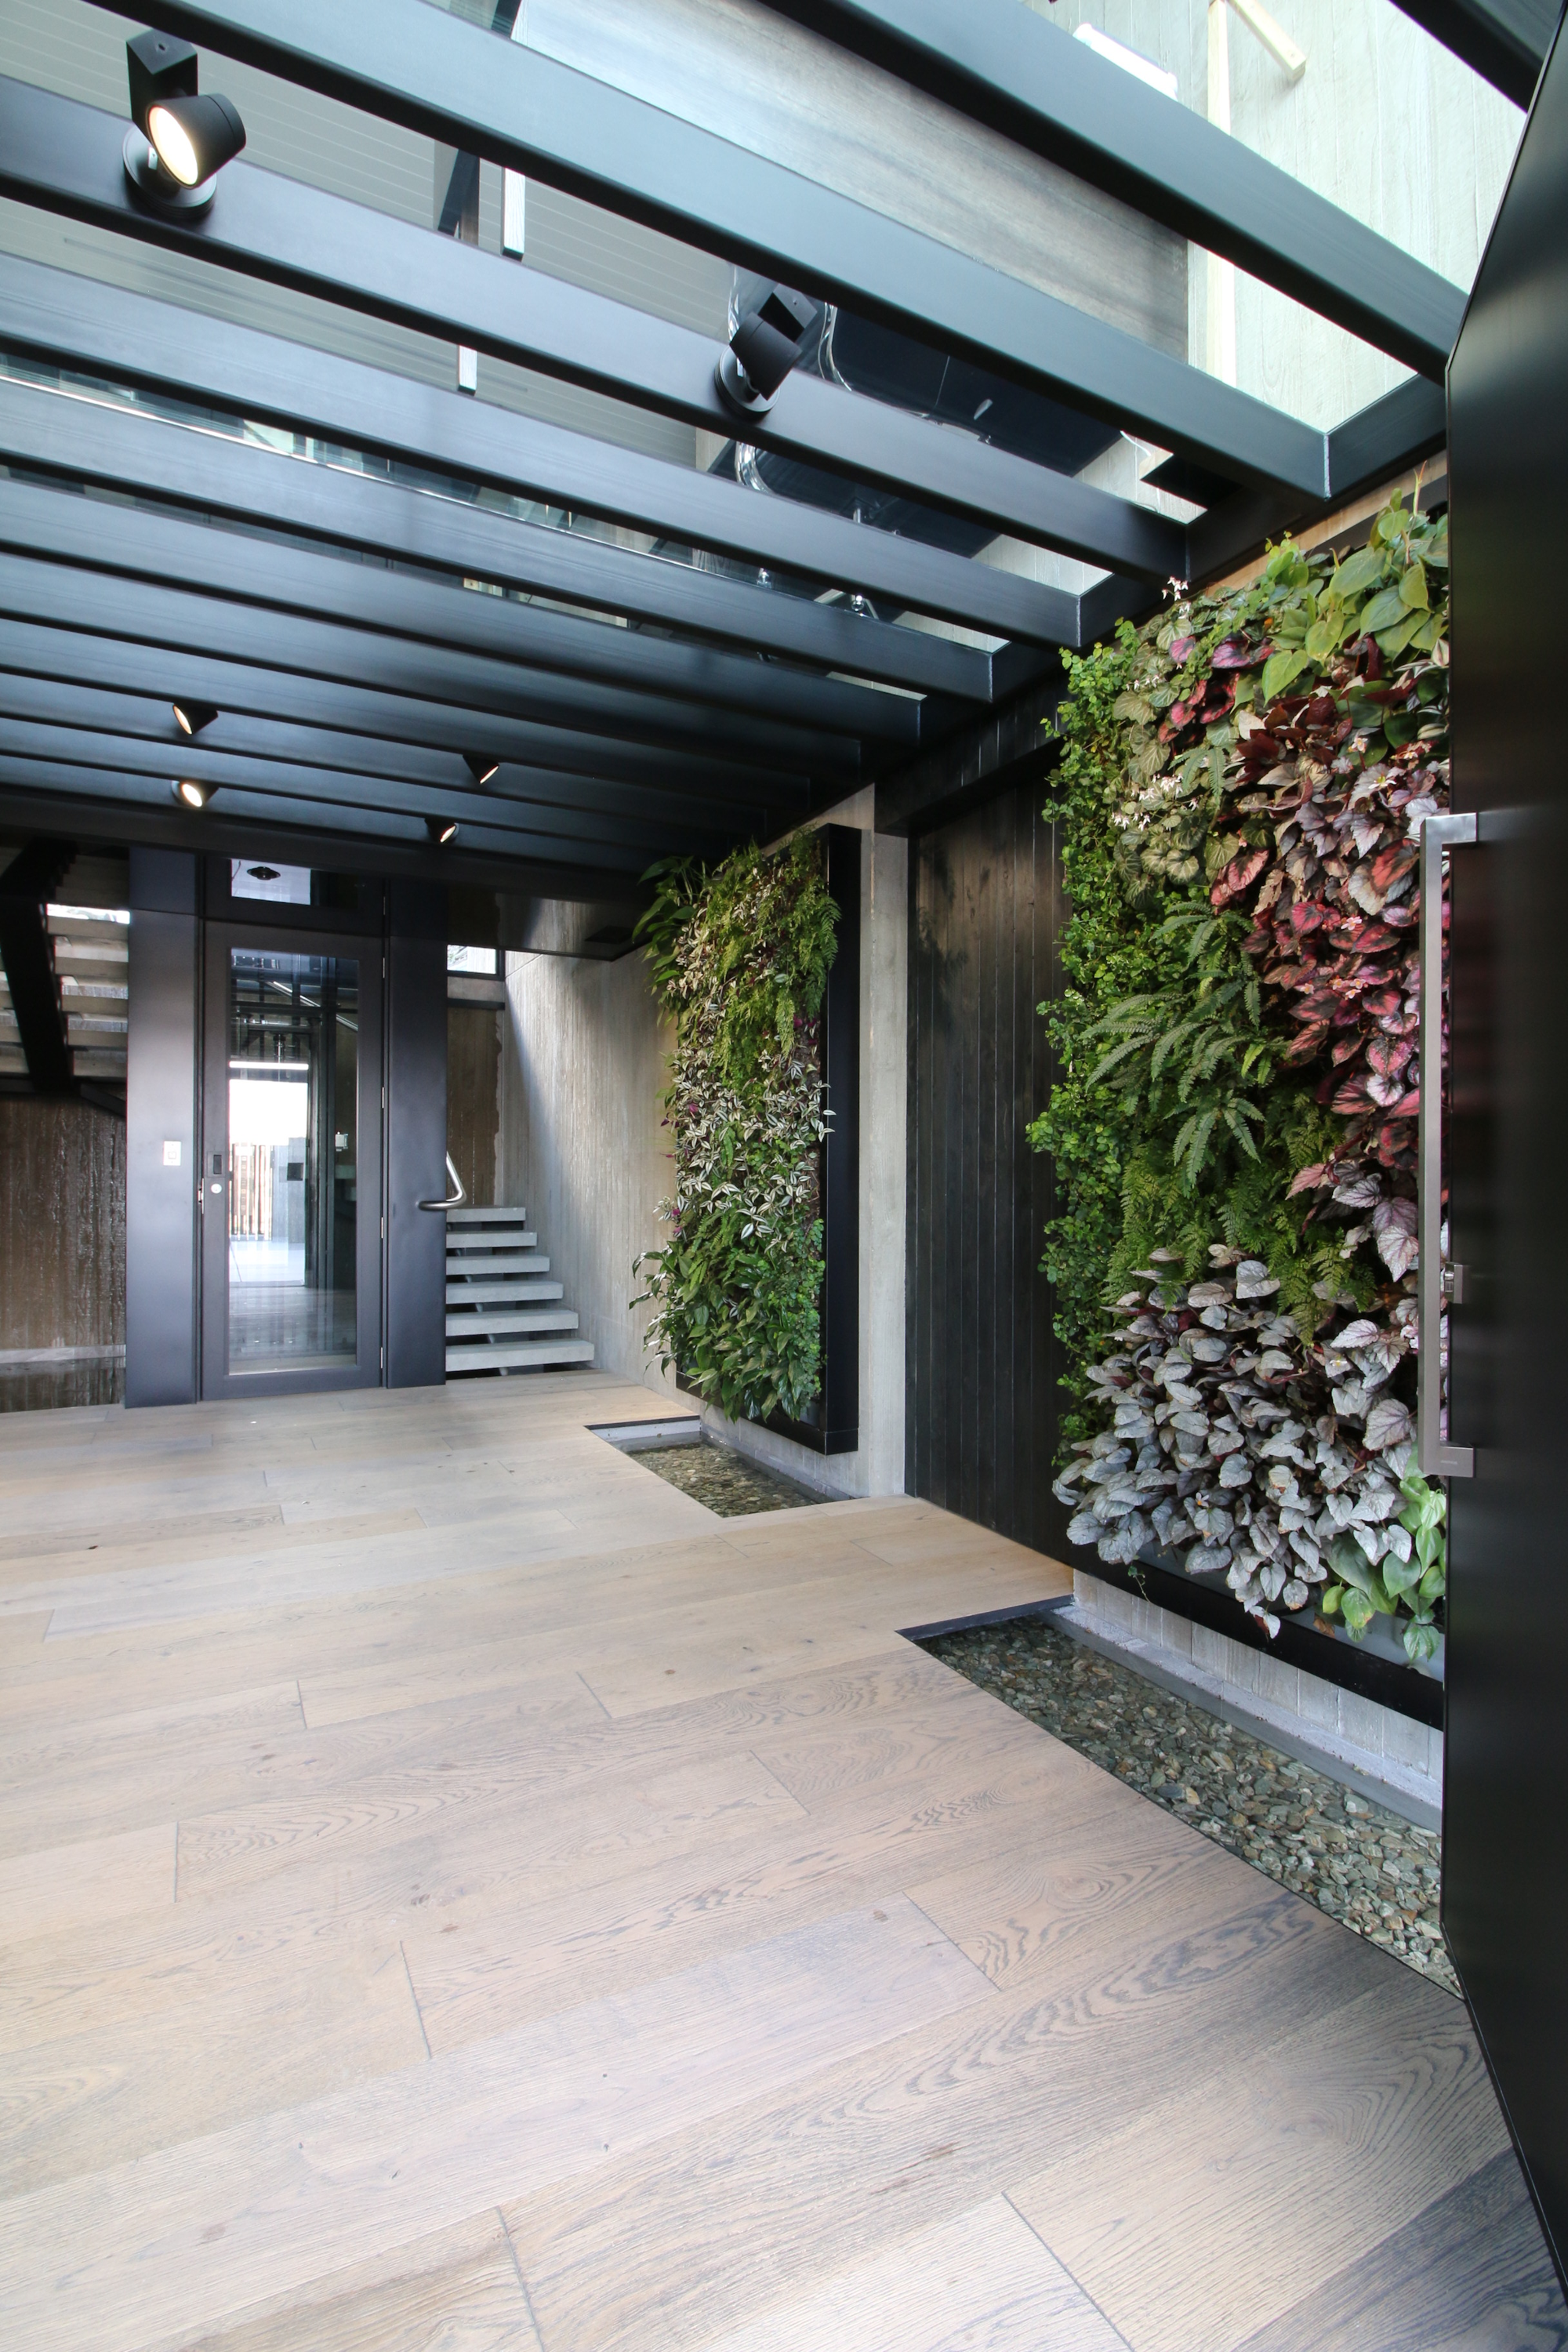 Main Reception Area In Luxury House In New Zealand With Two of The Four Living Walls